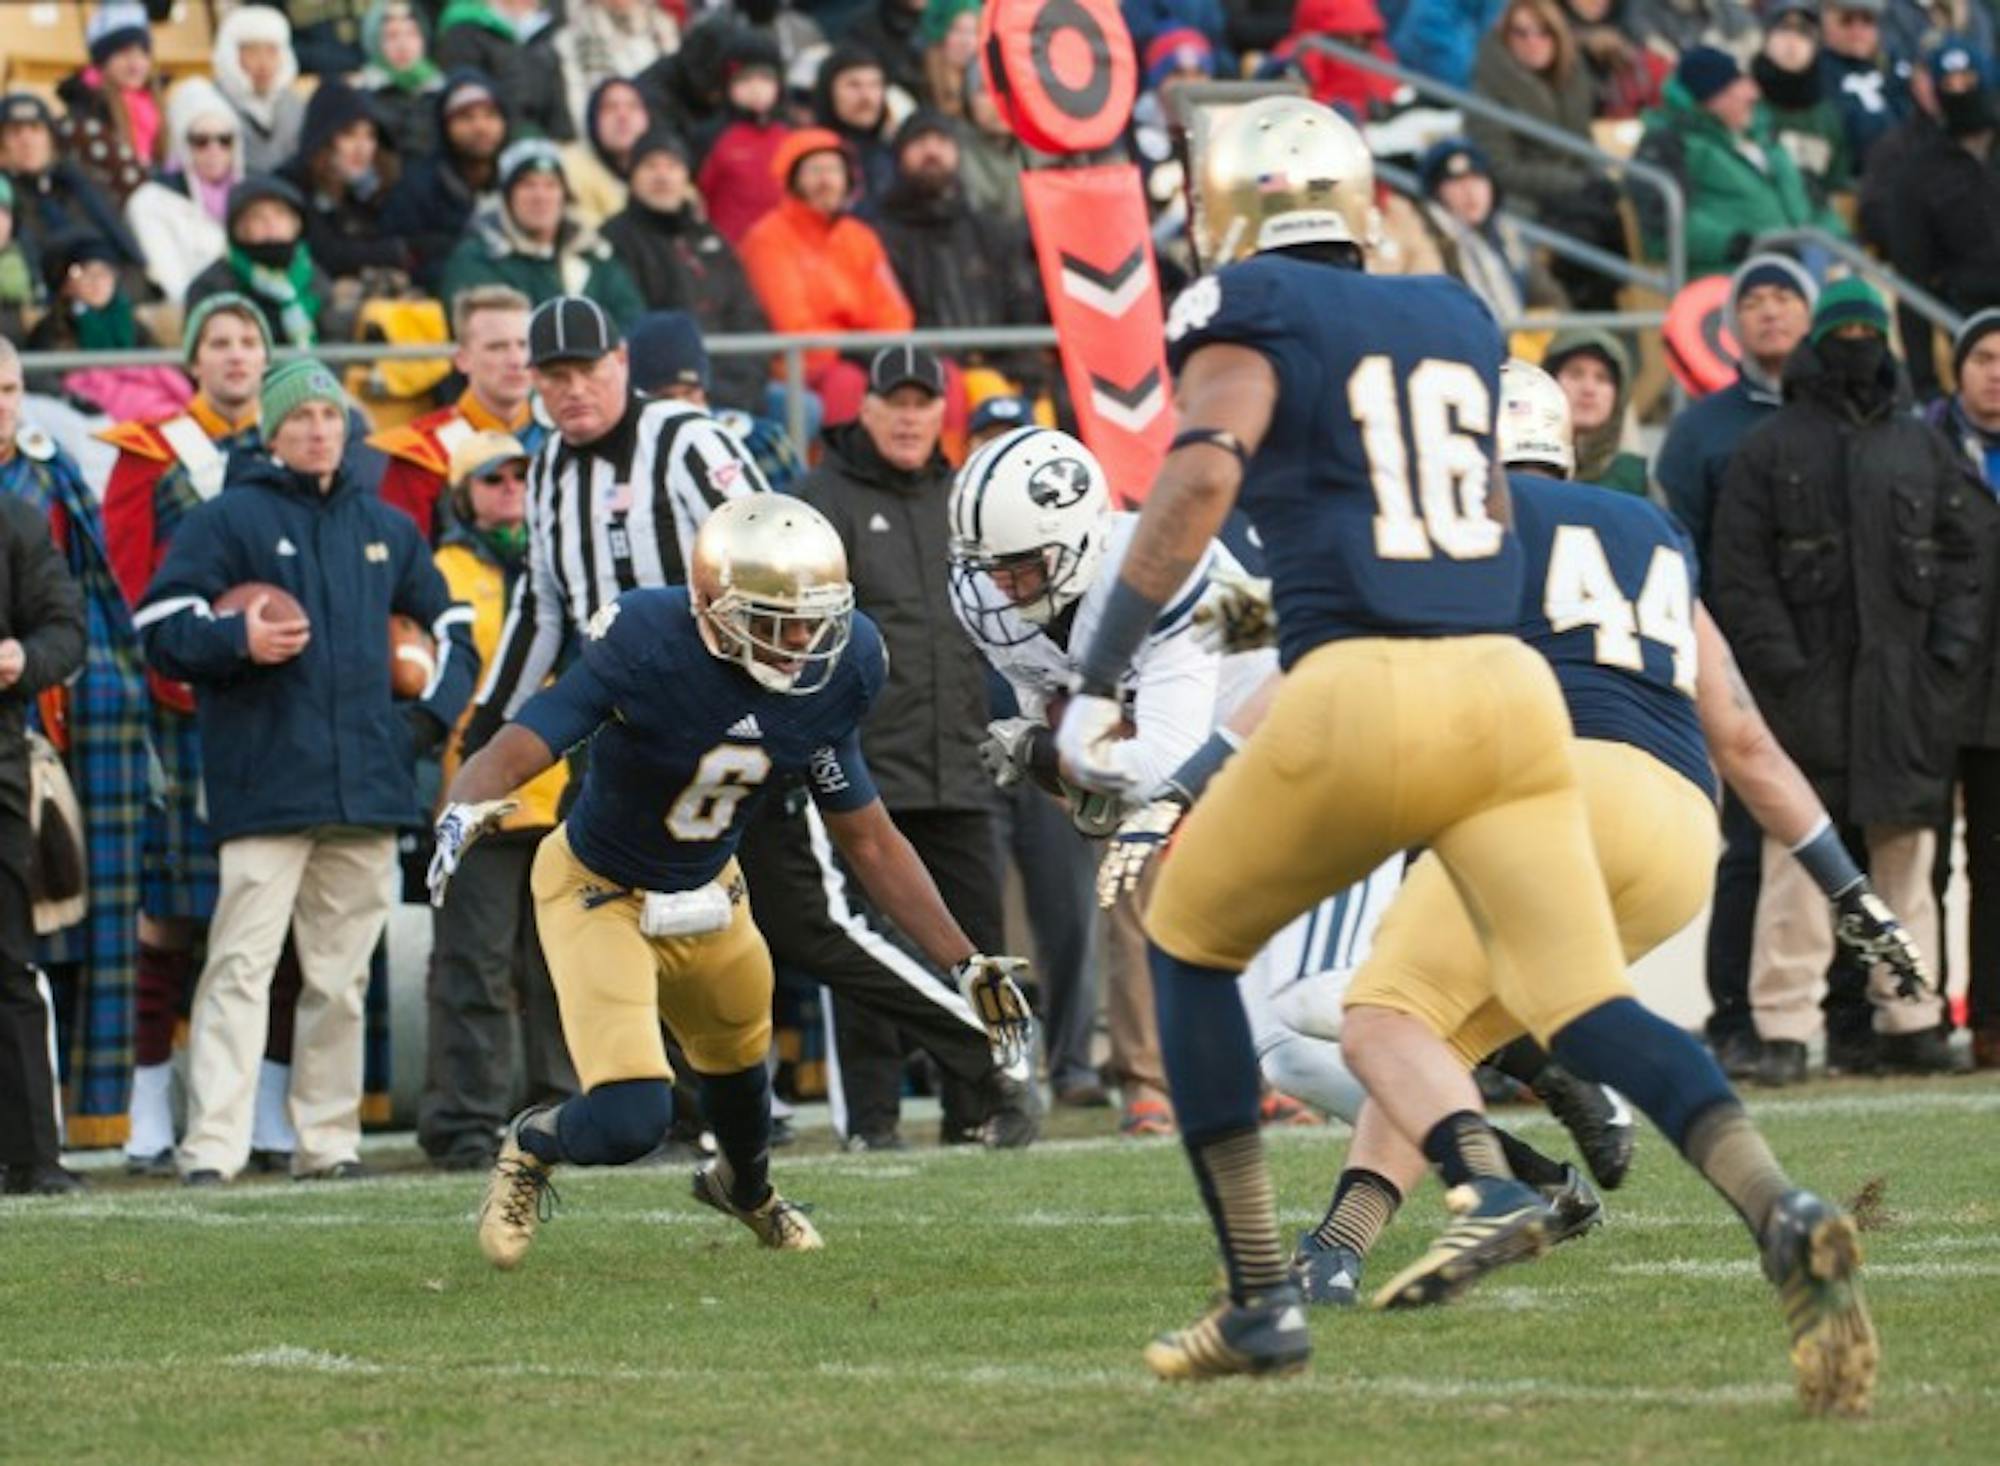 Senior cornerback KeiVarae Russell, left, prepares to make a tackle during Notre Dame’s 23-13 win over BYU at Notre Dame Stadium on Nov. 23, 2013. Russell was one of five players suspended in summer 2014 as part of the “Frozen Five” scandal. Notre Dame was placed on probation by the NCAA and ordered to vacate wins from the 2012 and 2013 seasons Tuesday.